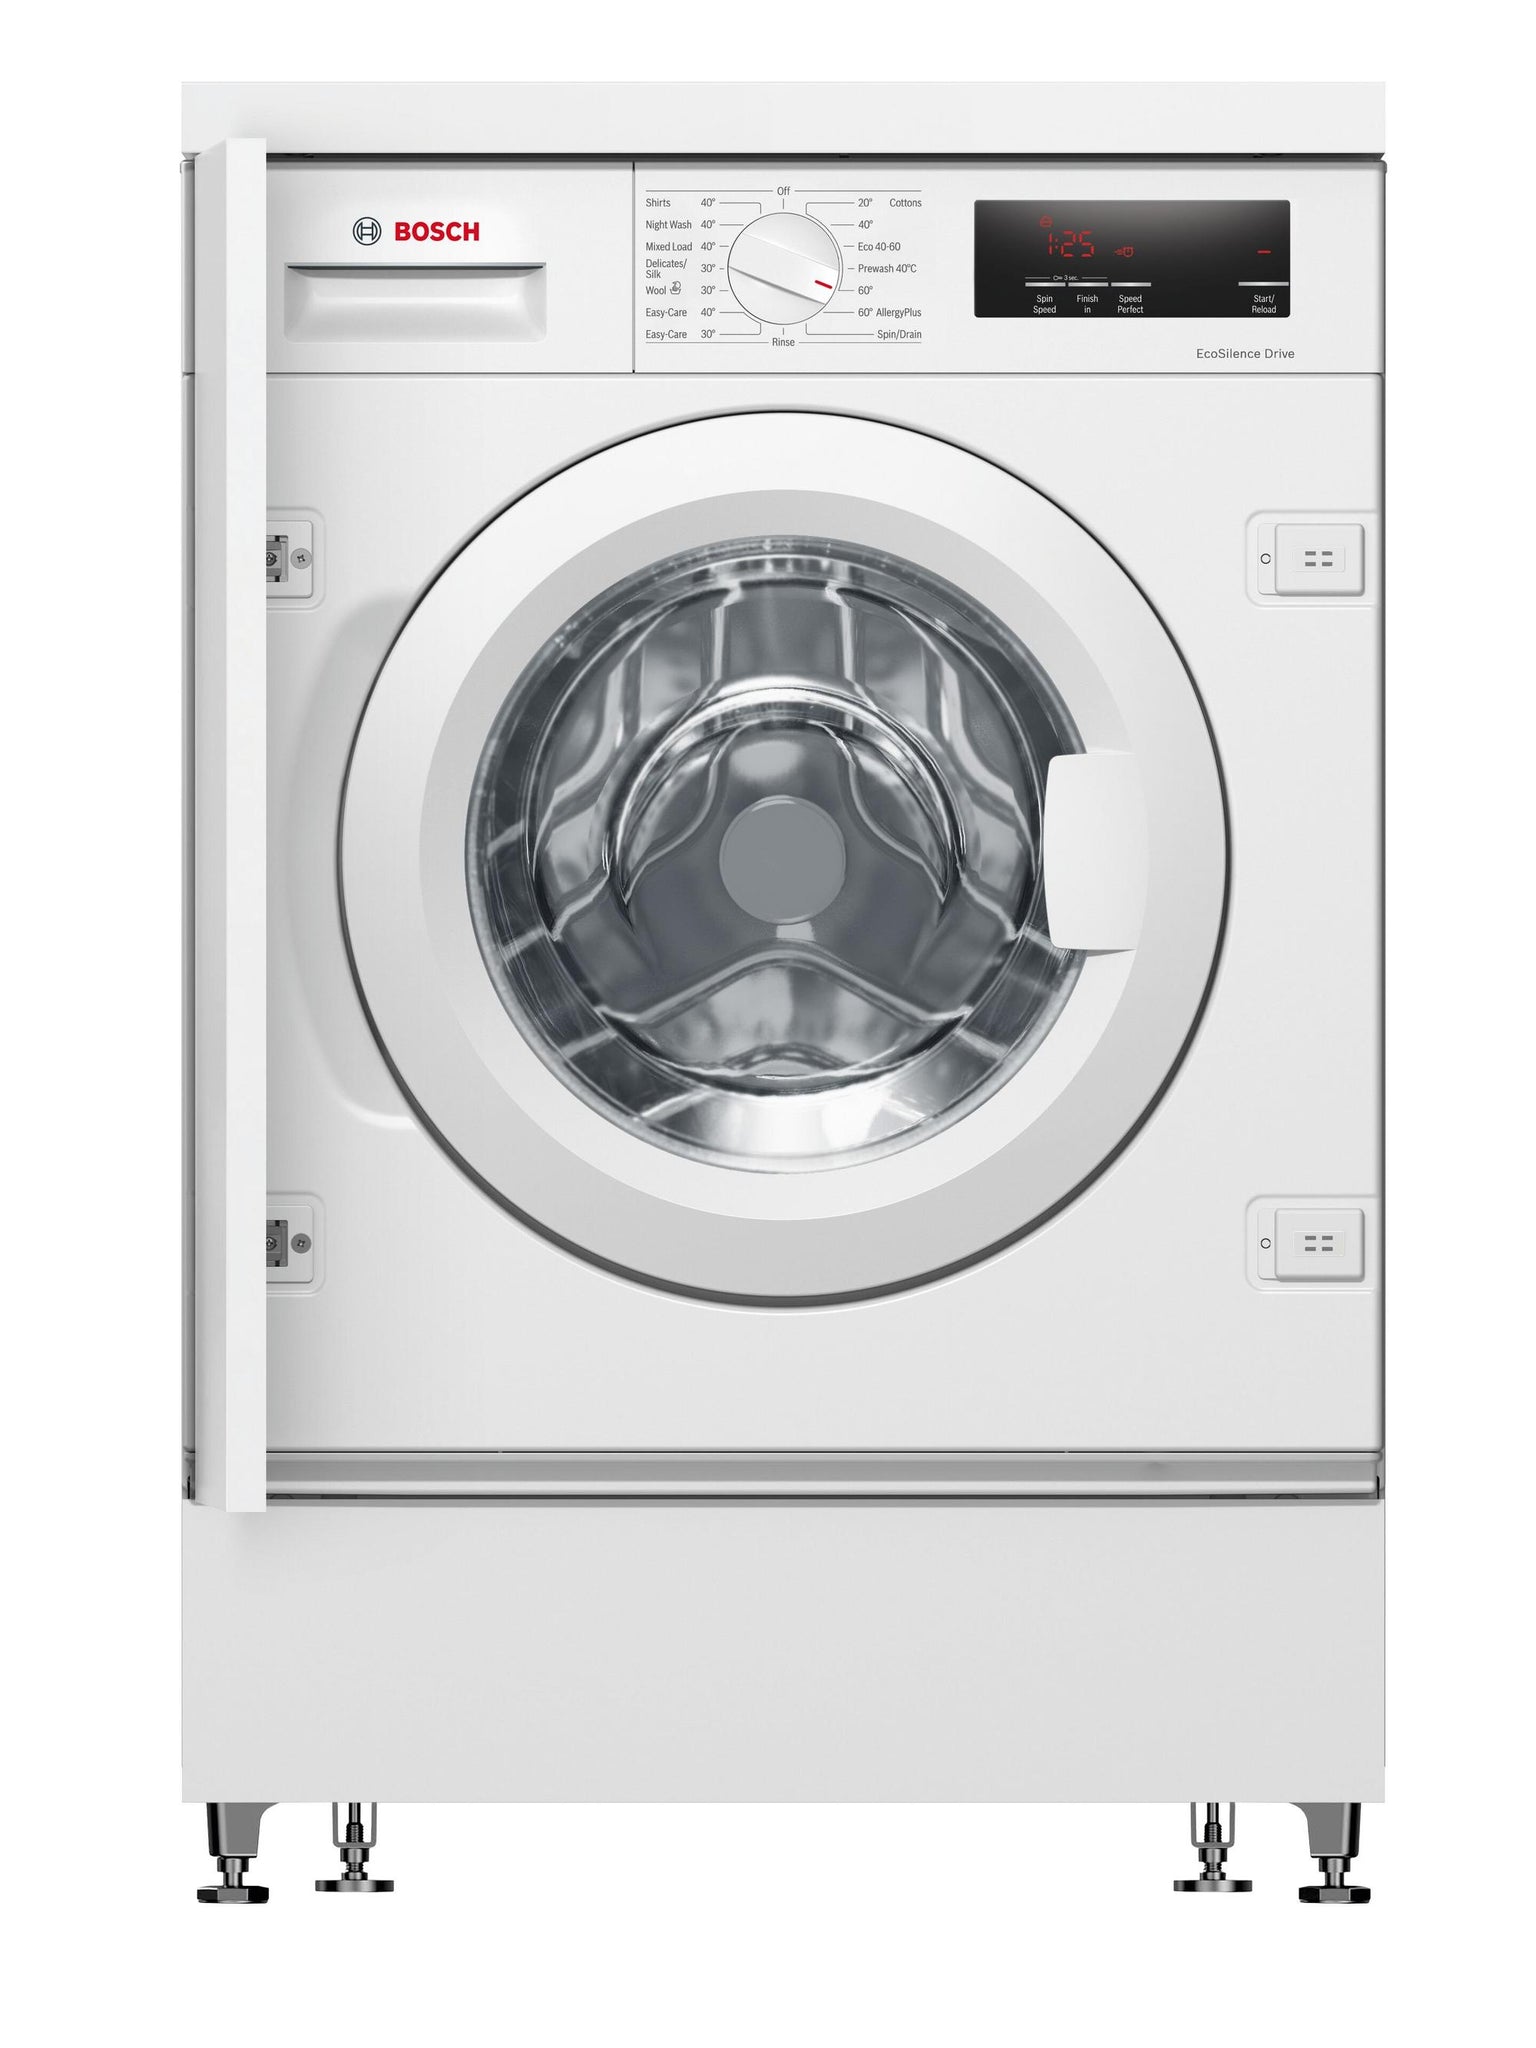 Bosch Wiw28302gb Integrated Washing Machine Euronics Limited Promotional Offer